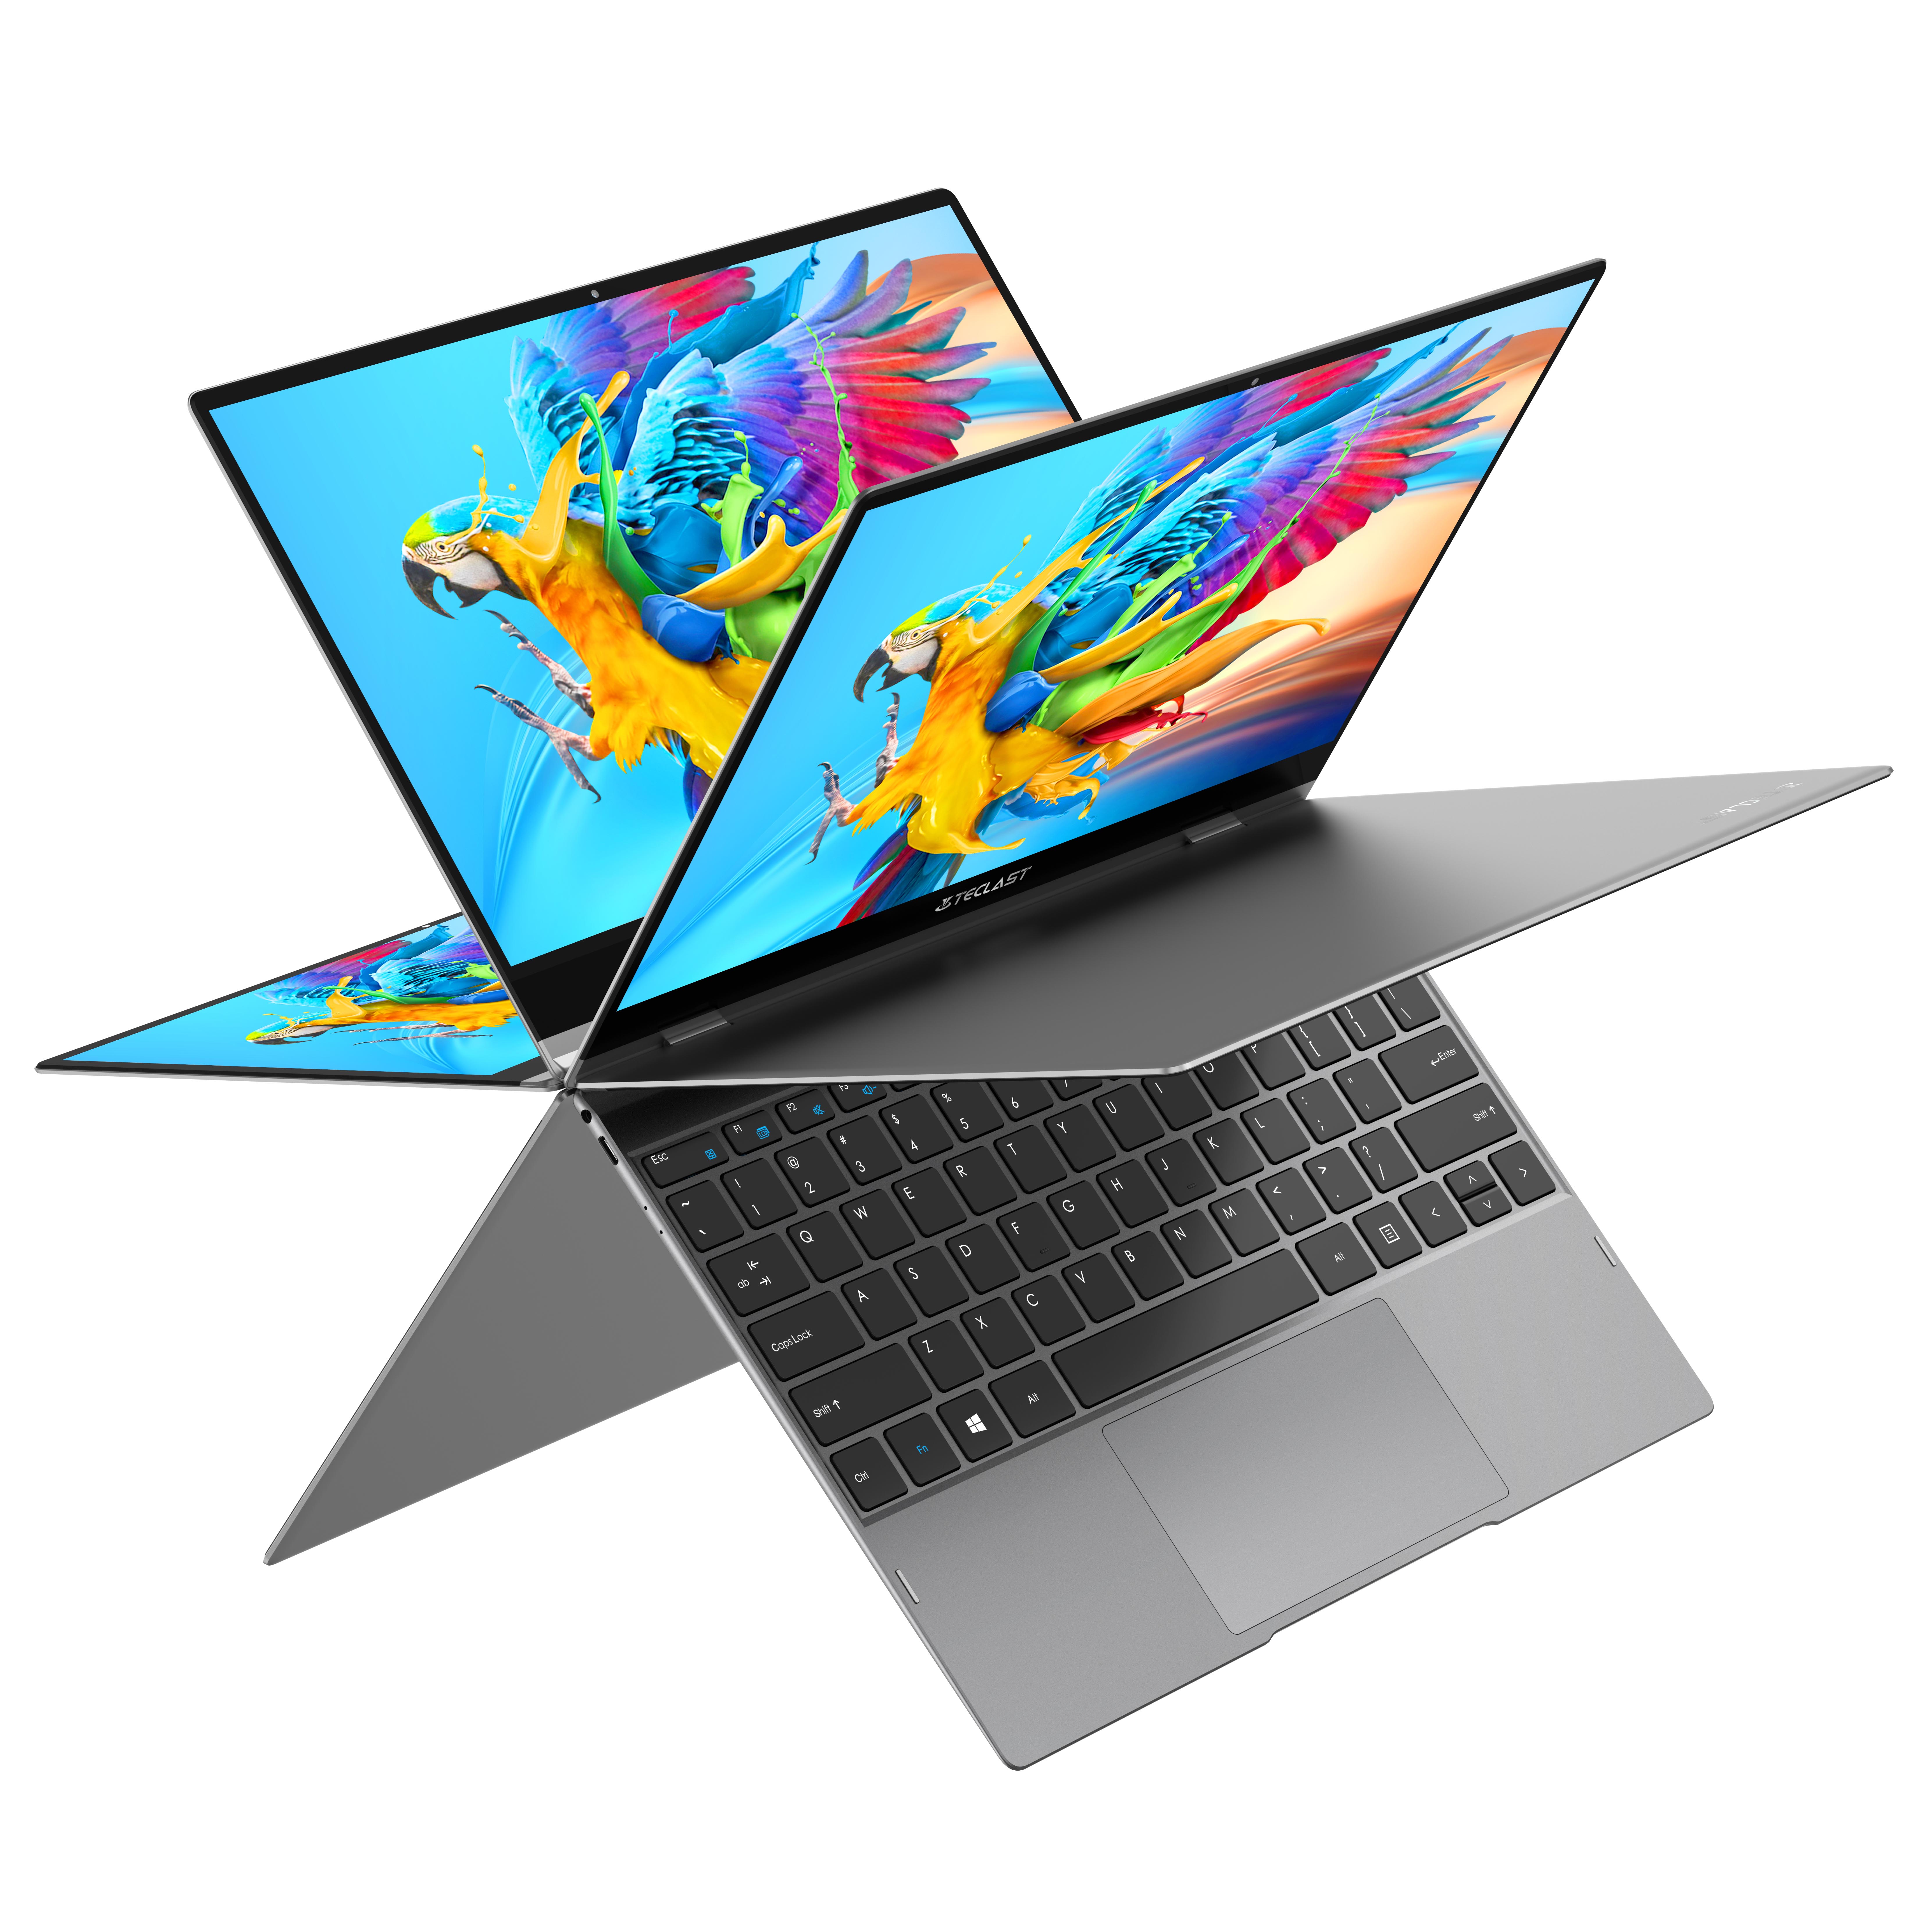 Find Teclast F6 Air Laptop 13 3 inch 360 Rotating Touch Screen Intel N4100 Quad Core 8GB LPDDR4 RAM 256GB SSD 41 8Wh Batery 2 0MP Camera Metal Cases Notebook for Sale on Gipsybee.com with cryptocurrencies